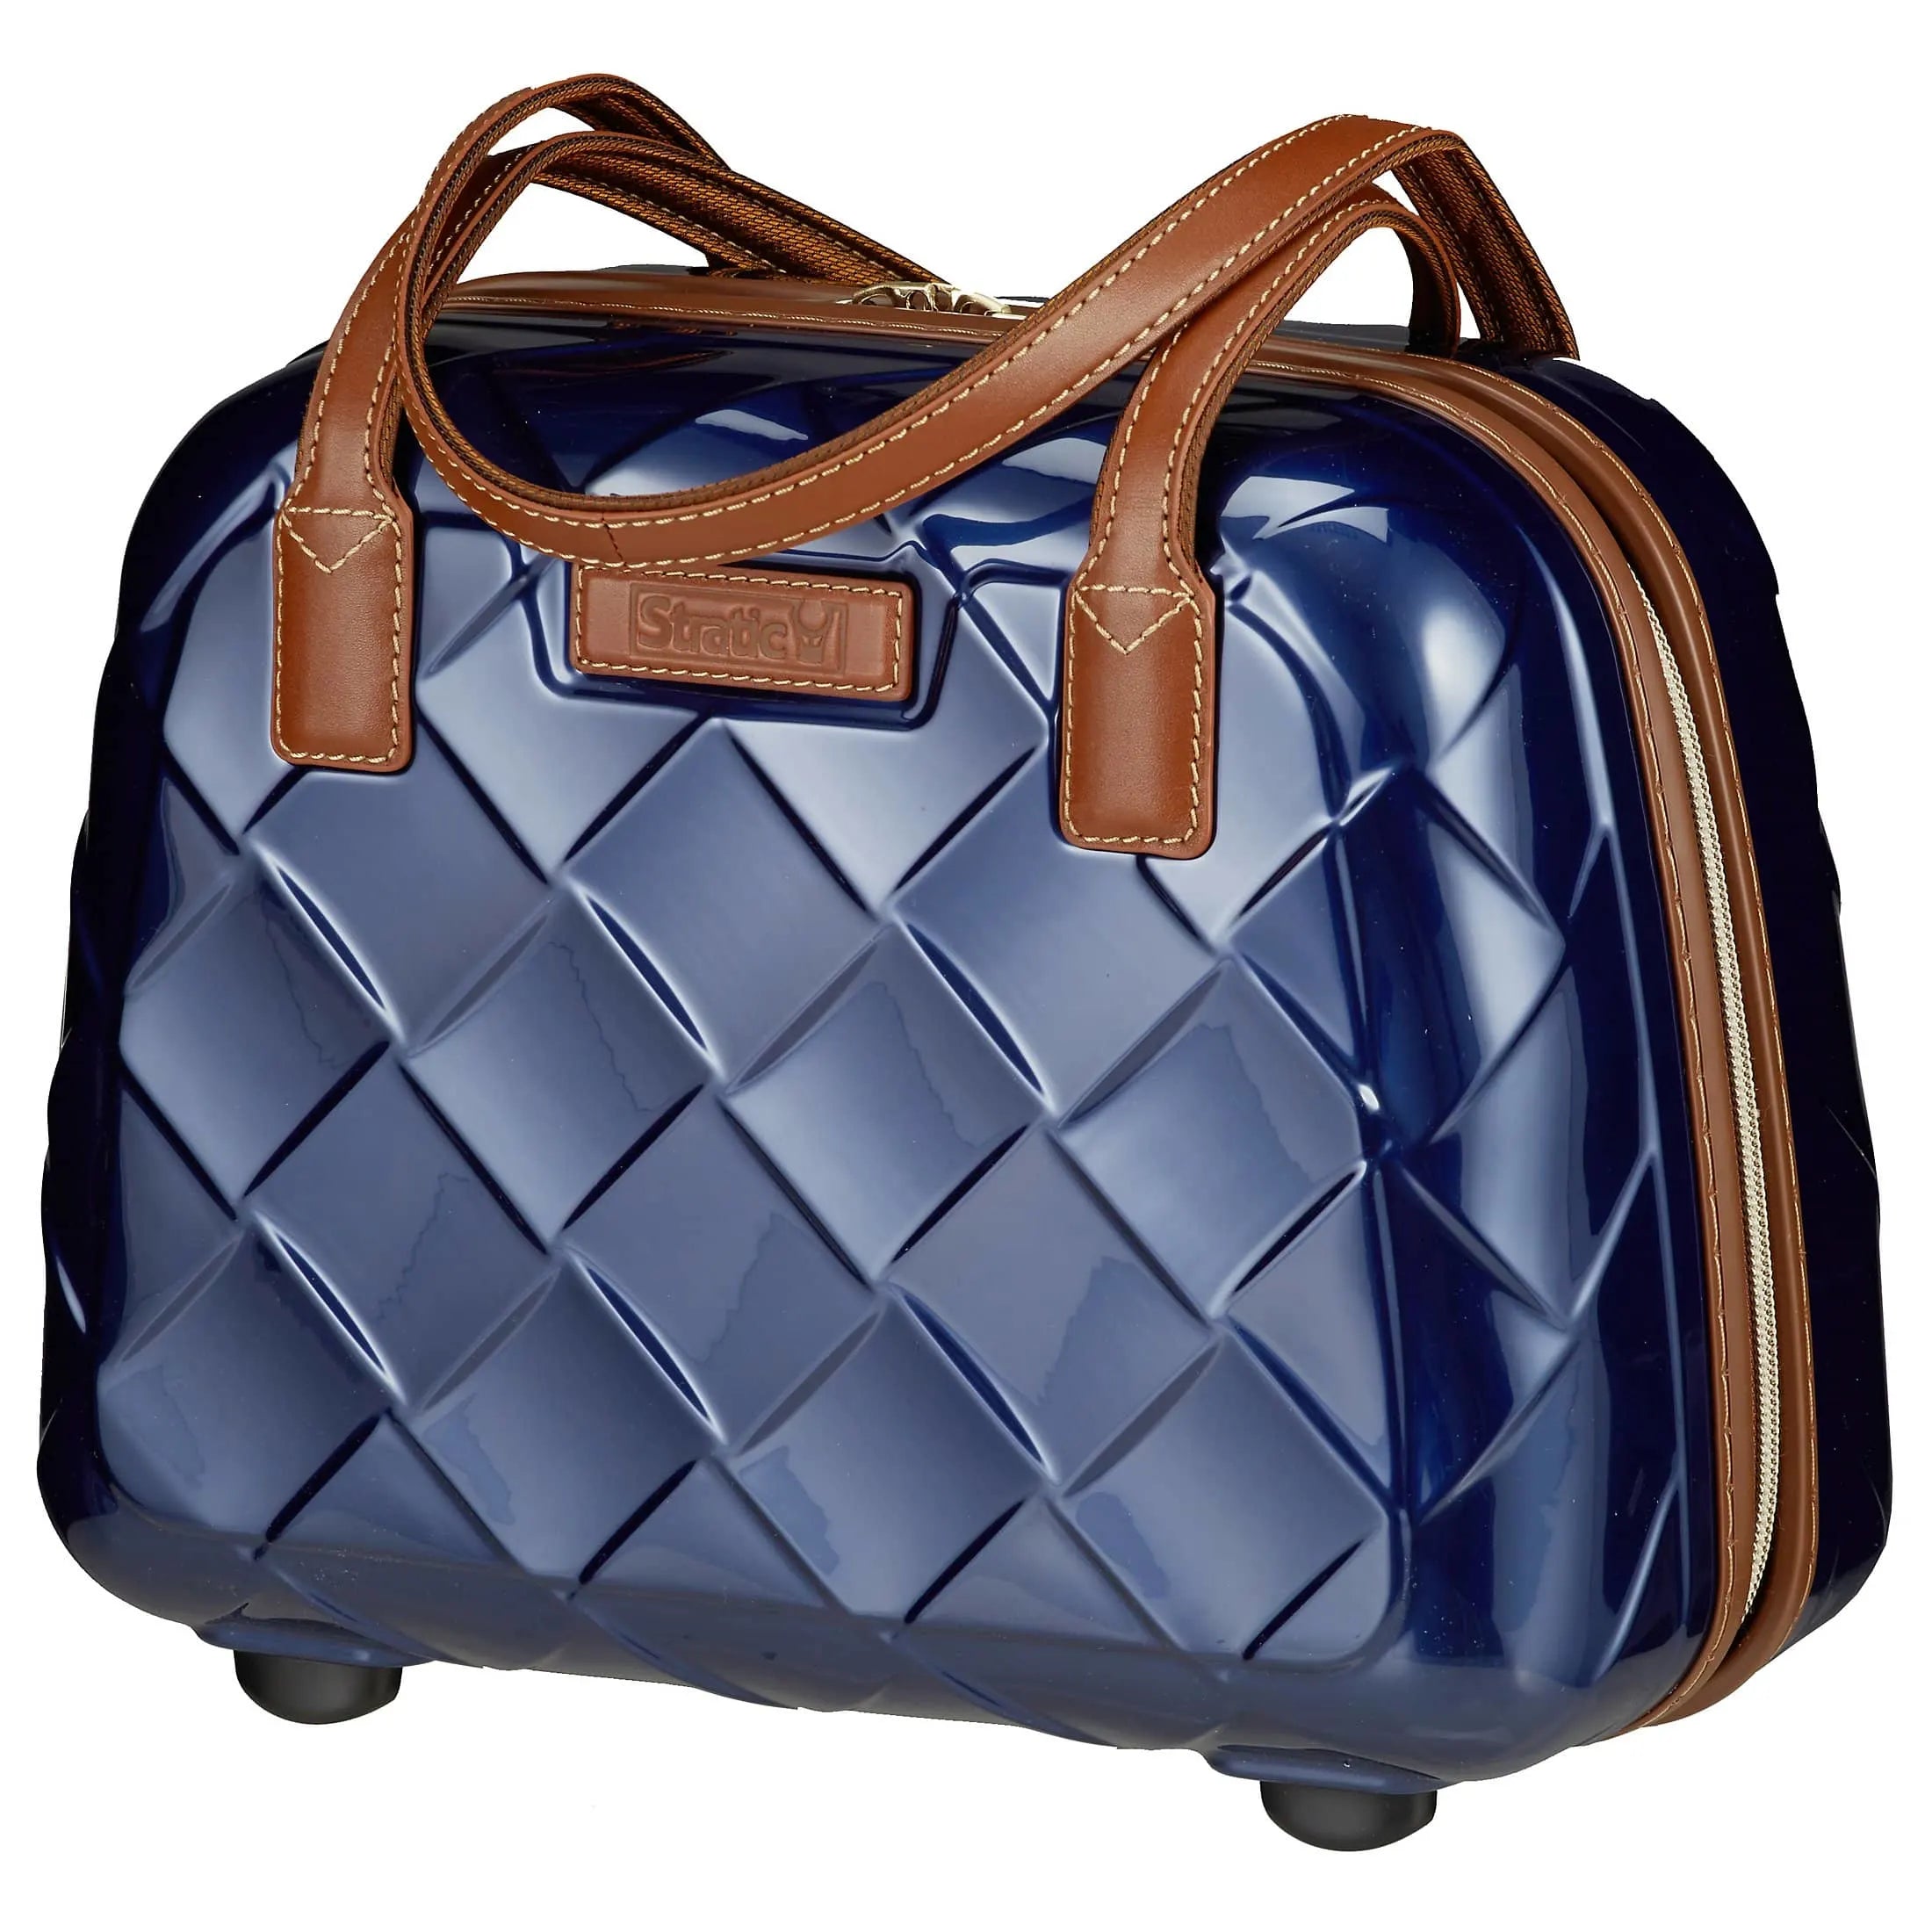 Stratic Leather & More Beautycase 36 cm - blue